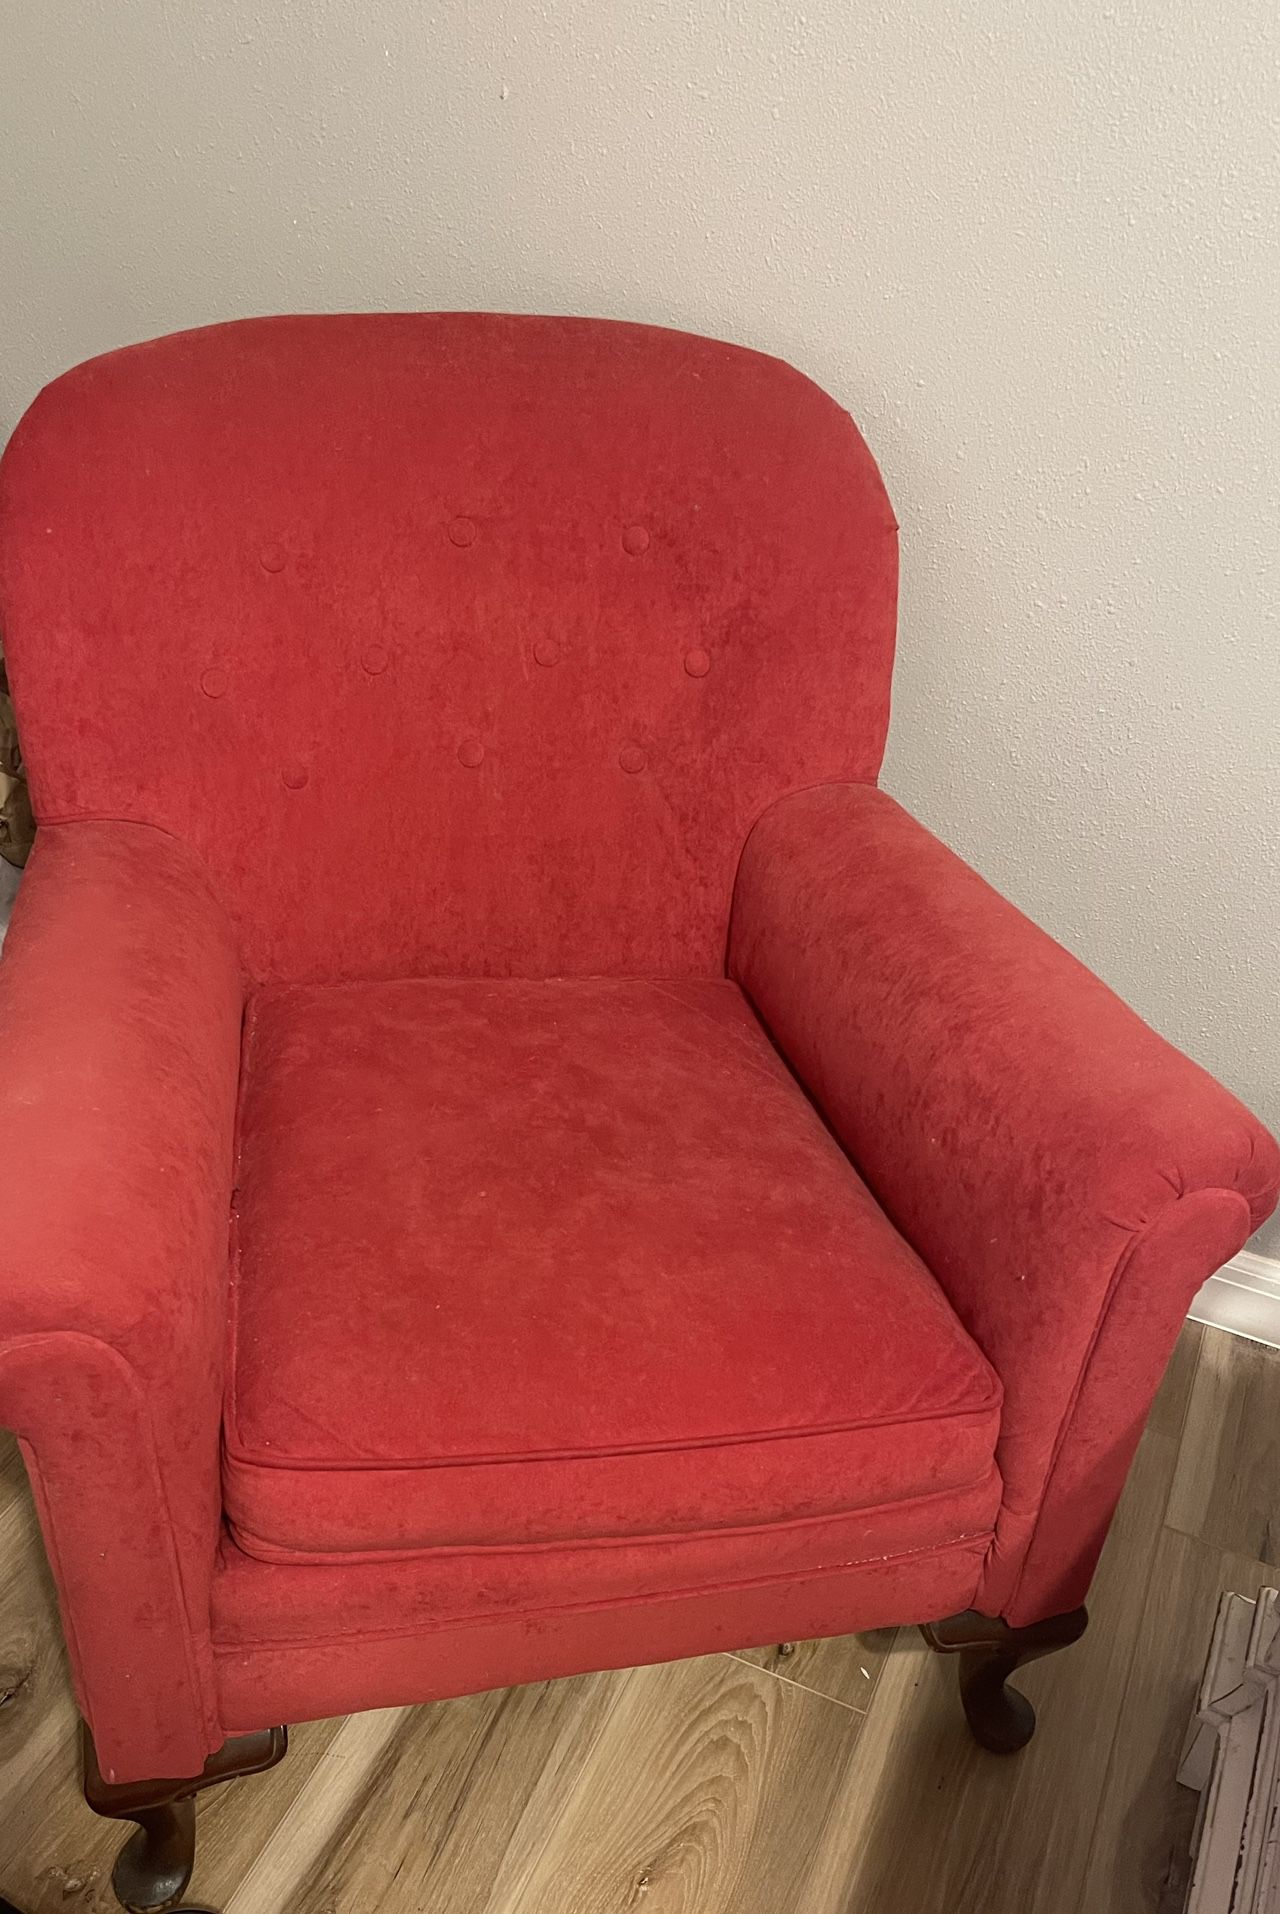 Adorable Antique Red Chair